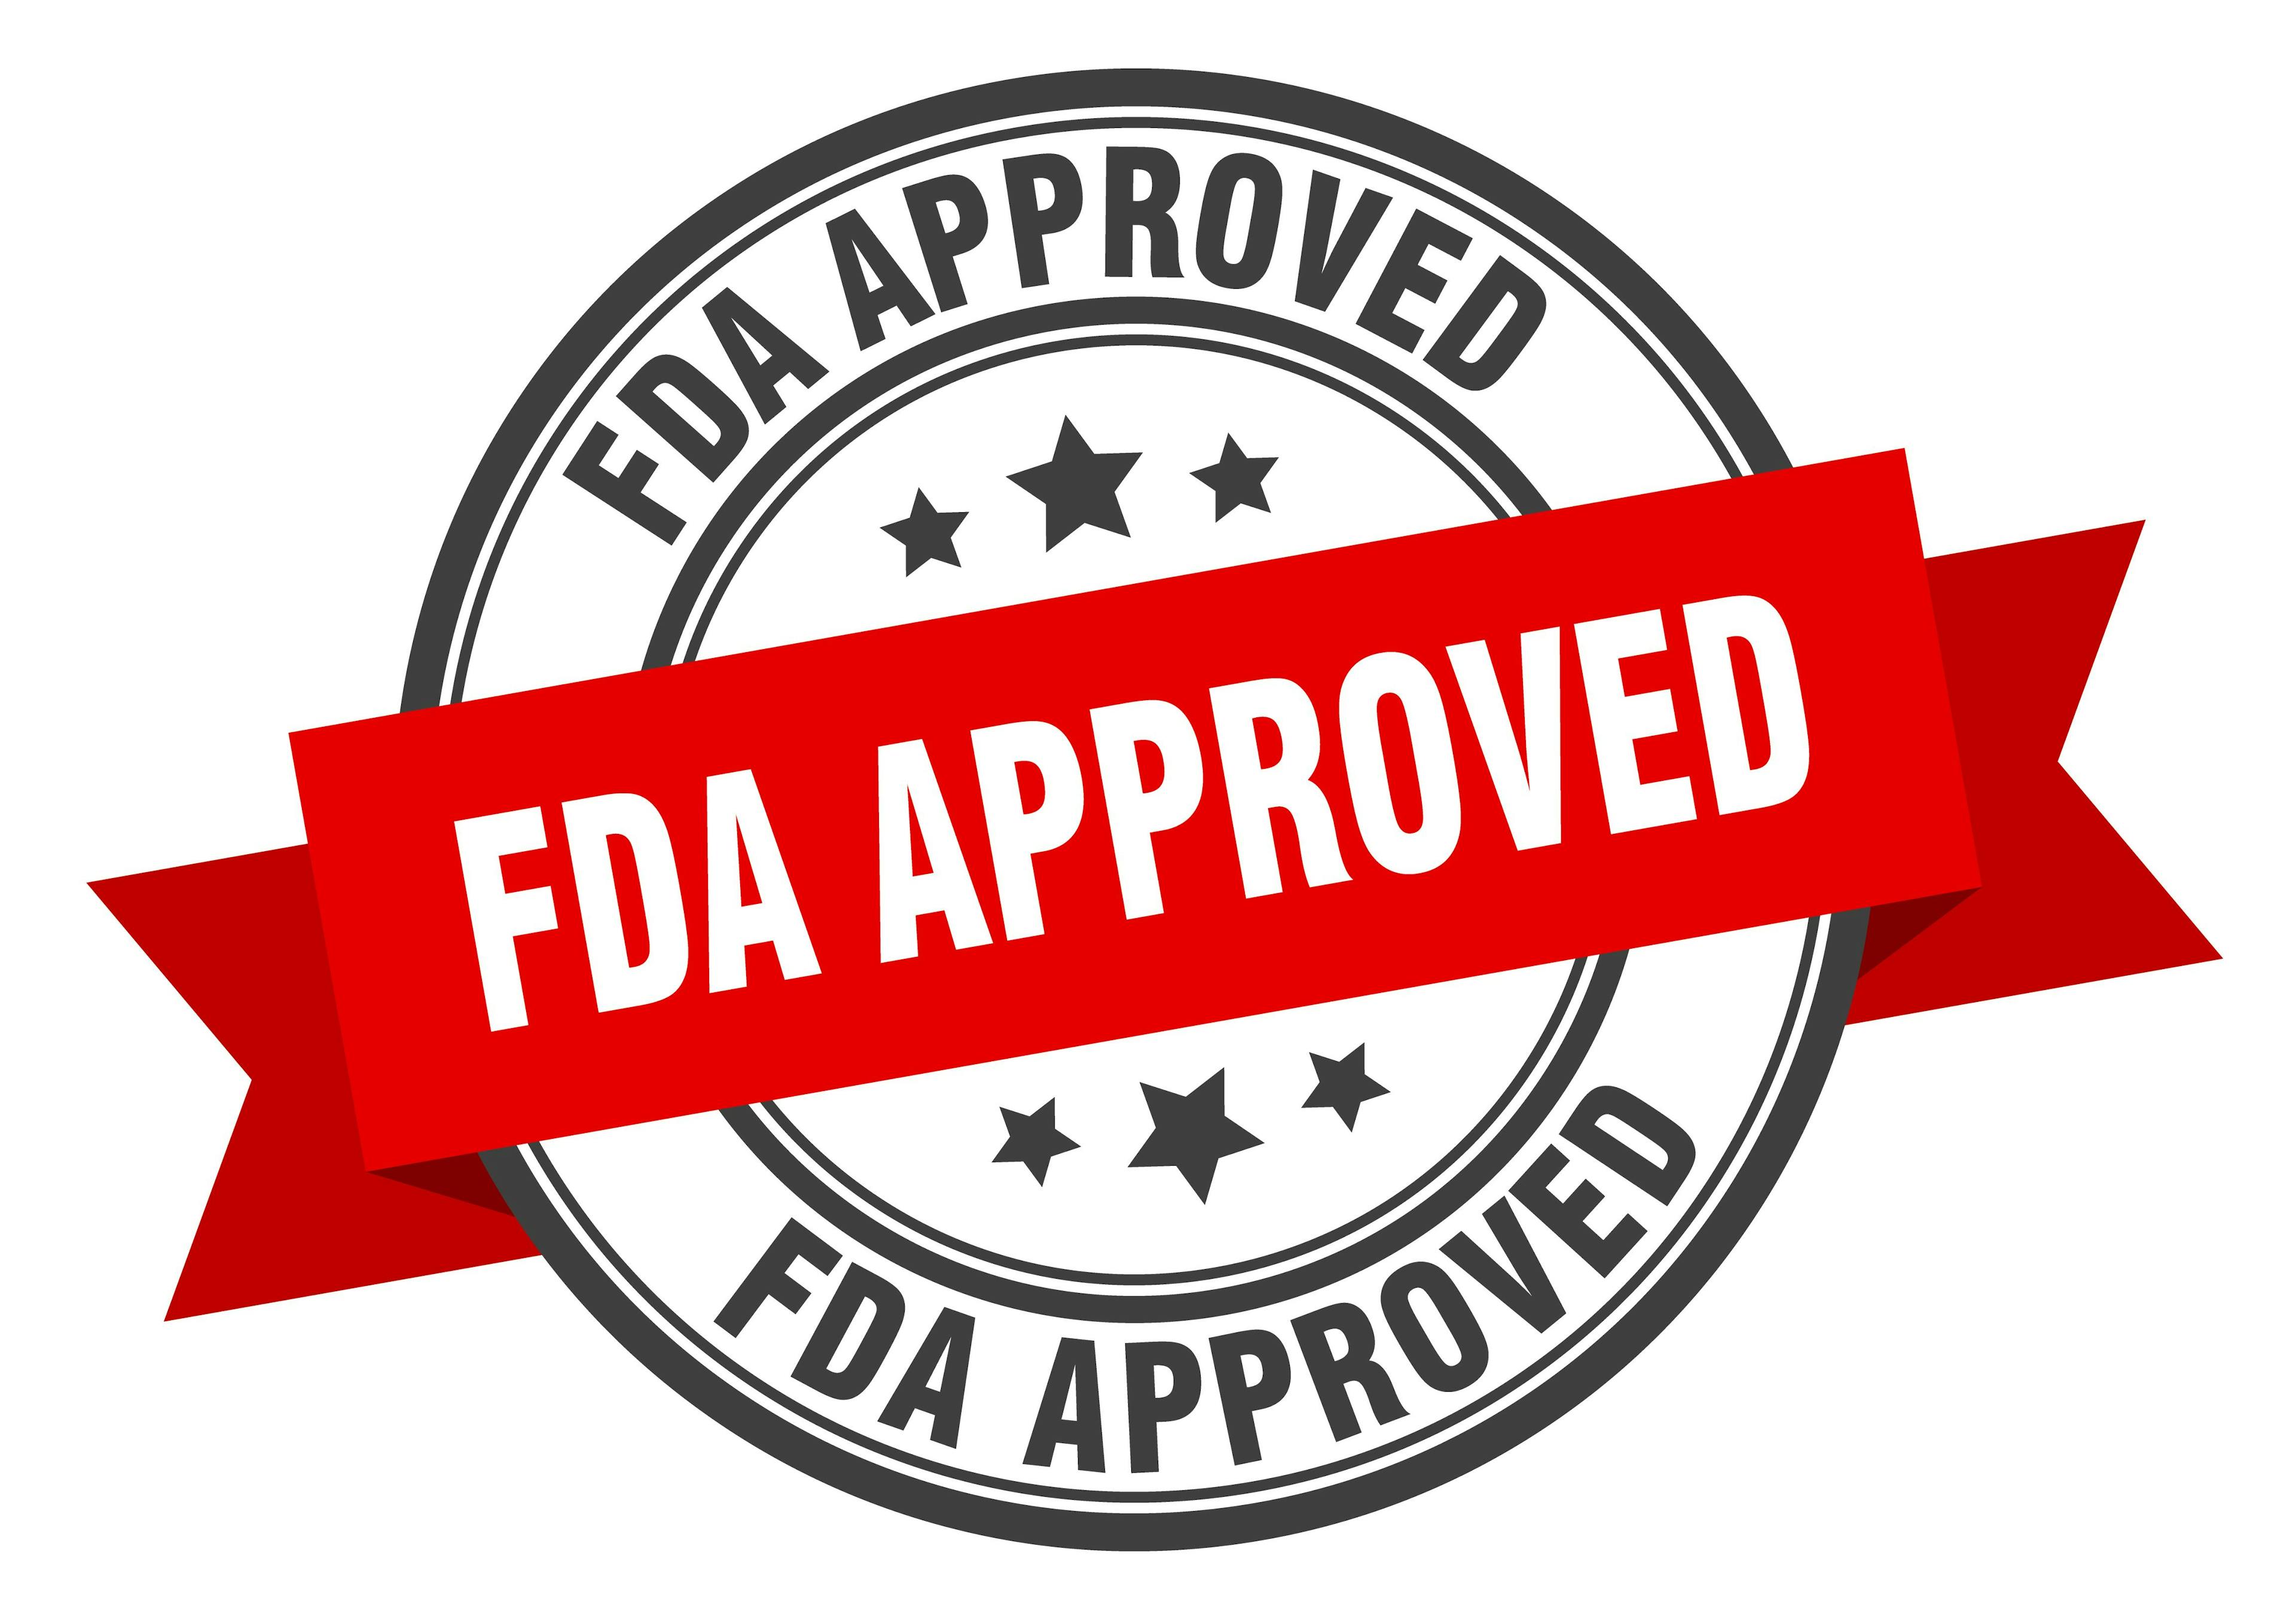 fda approved label. fda approved red band sign. fda approved - Image credit: Aquir | stock.adobe.com